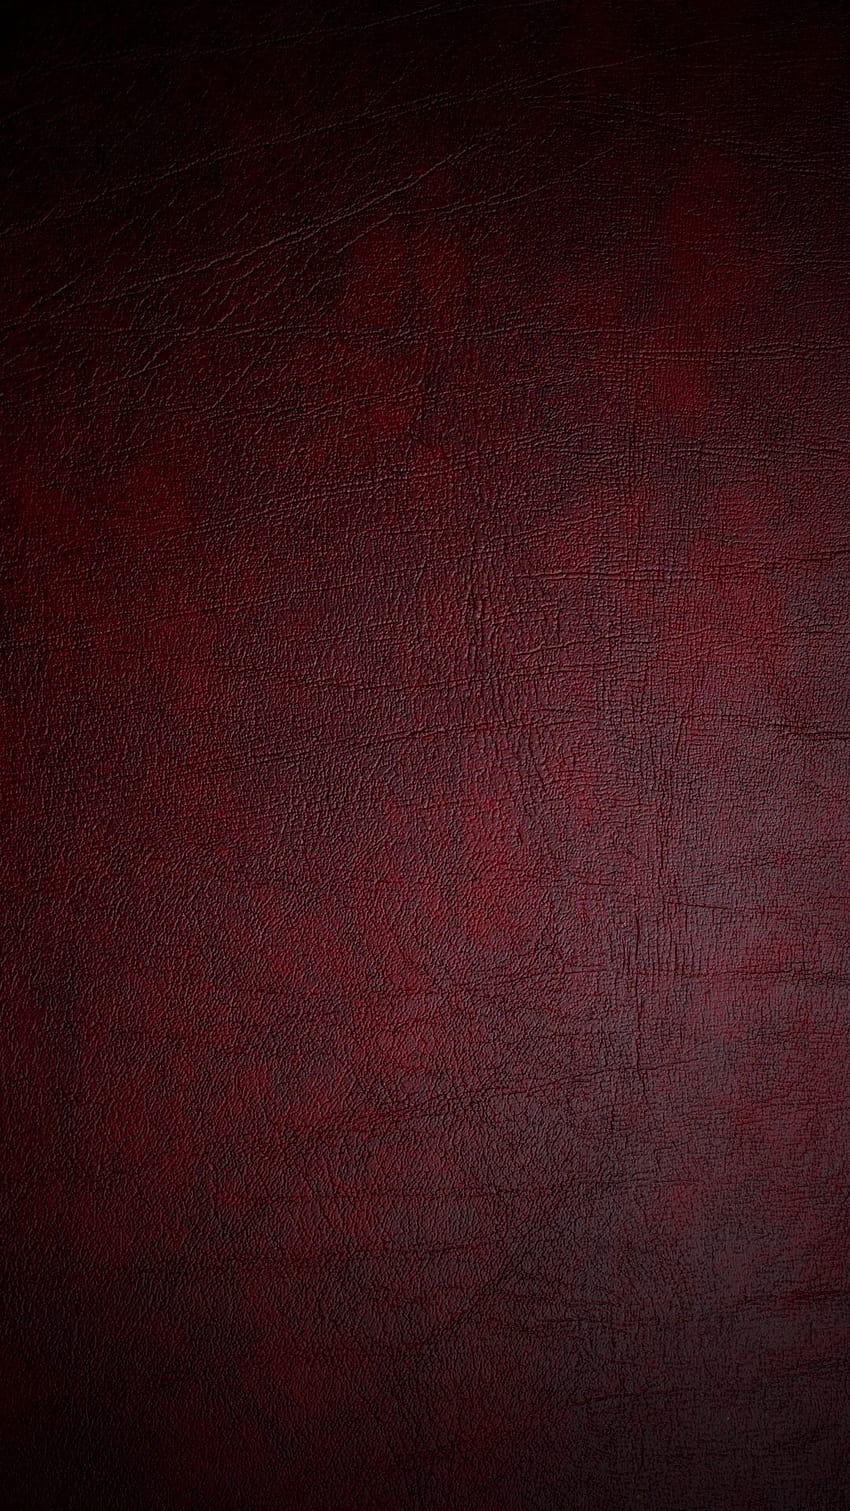 Red and Brown on Dog, color leather HD phone wallpaper